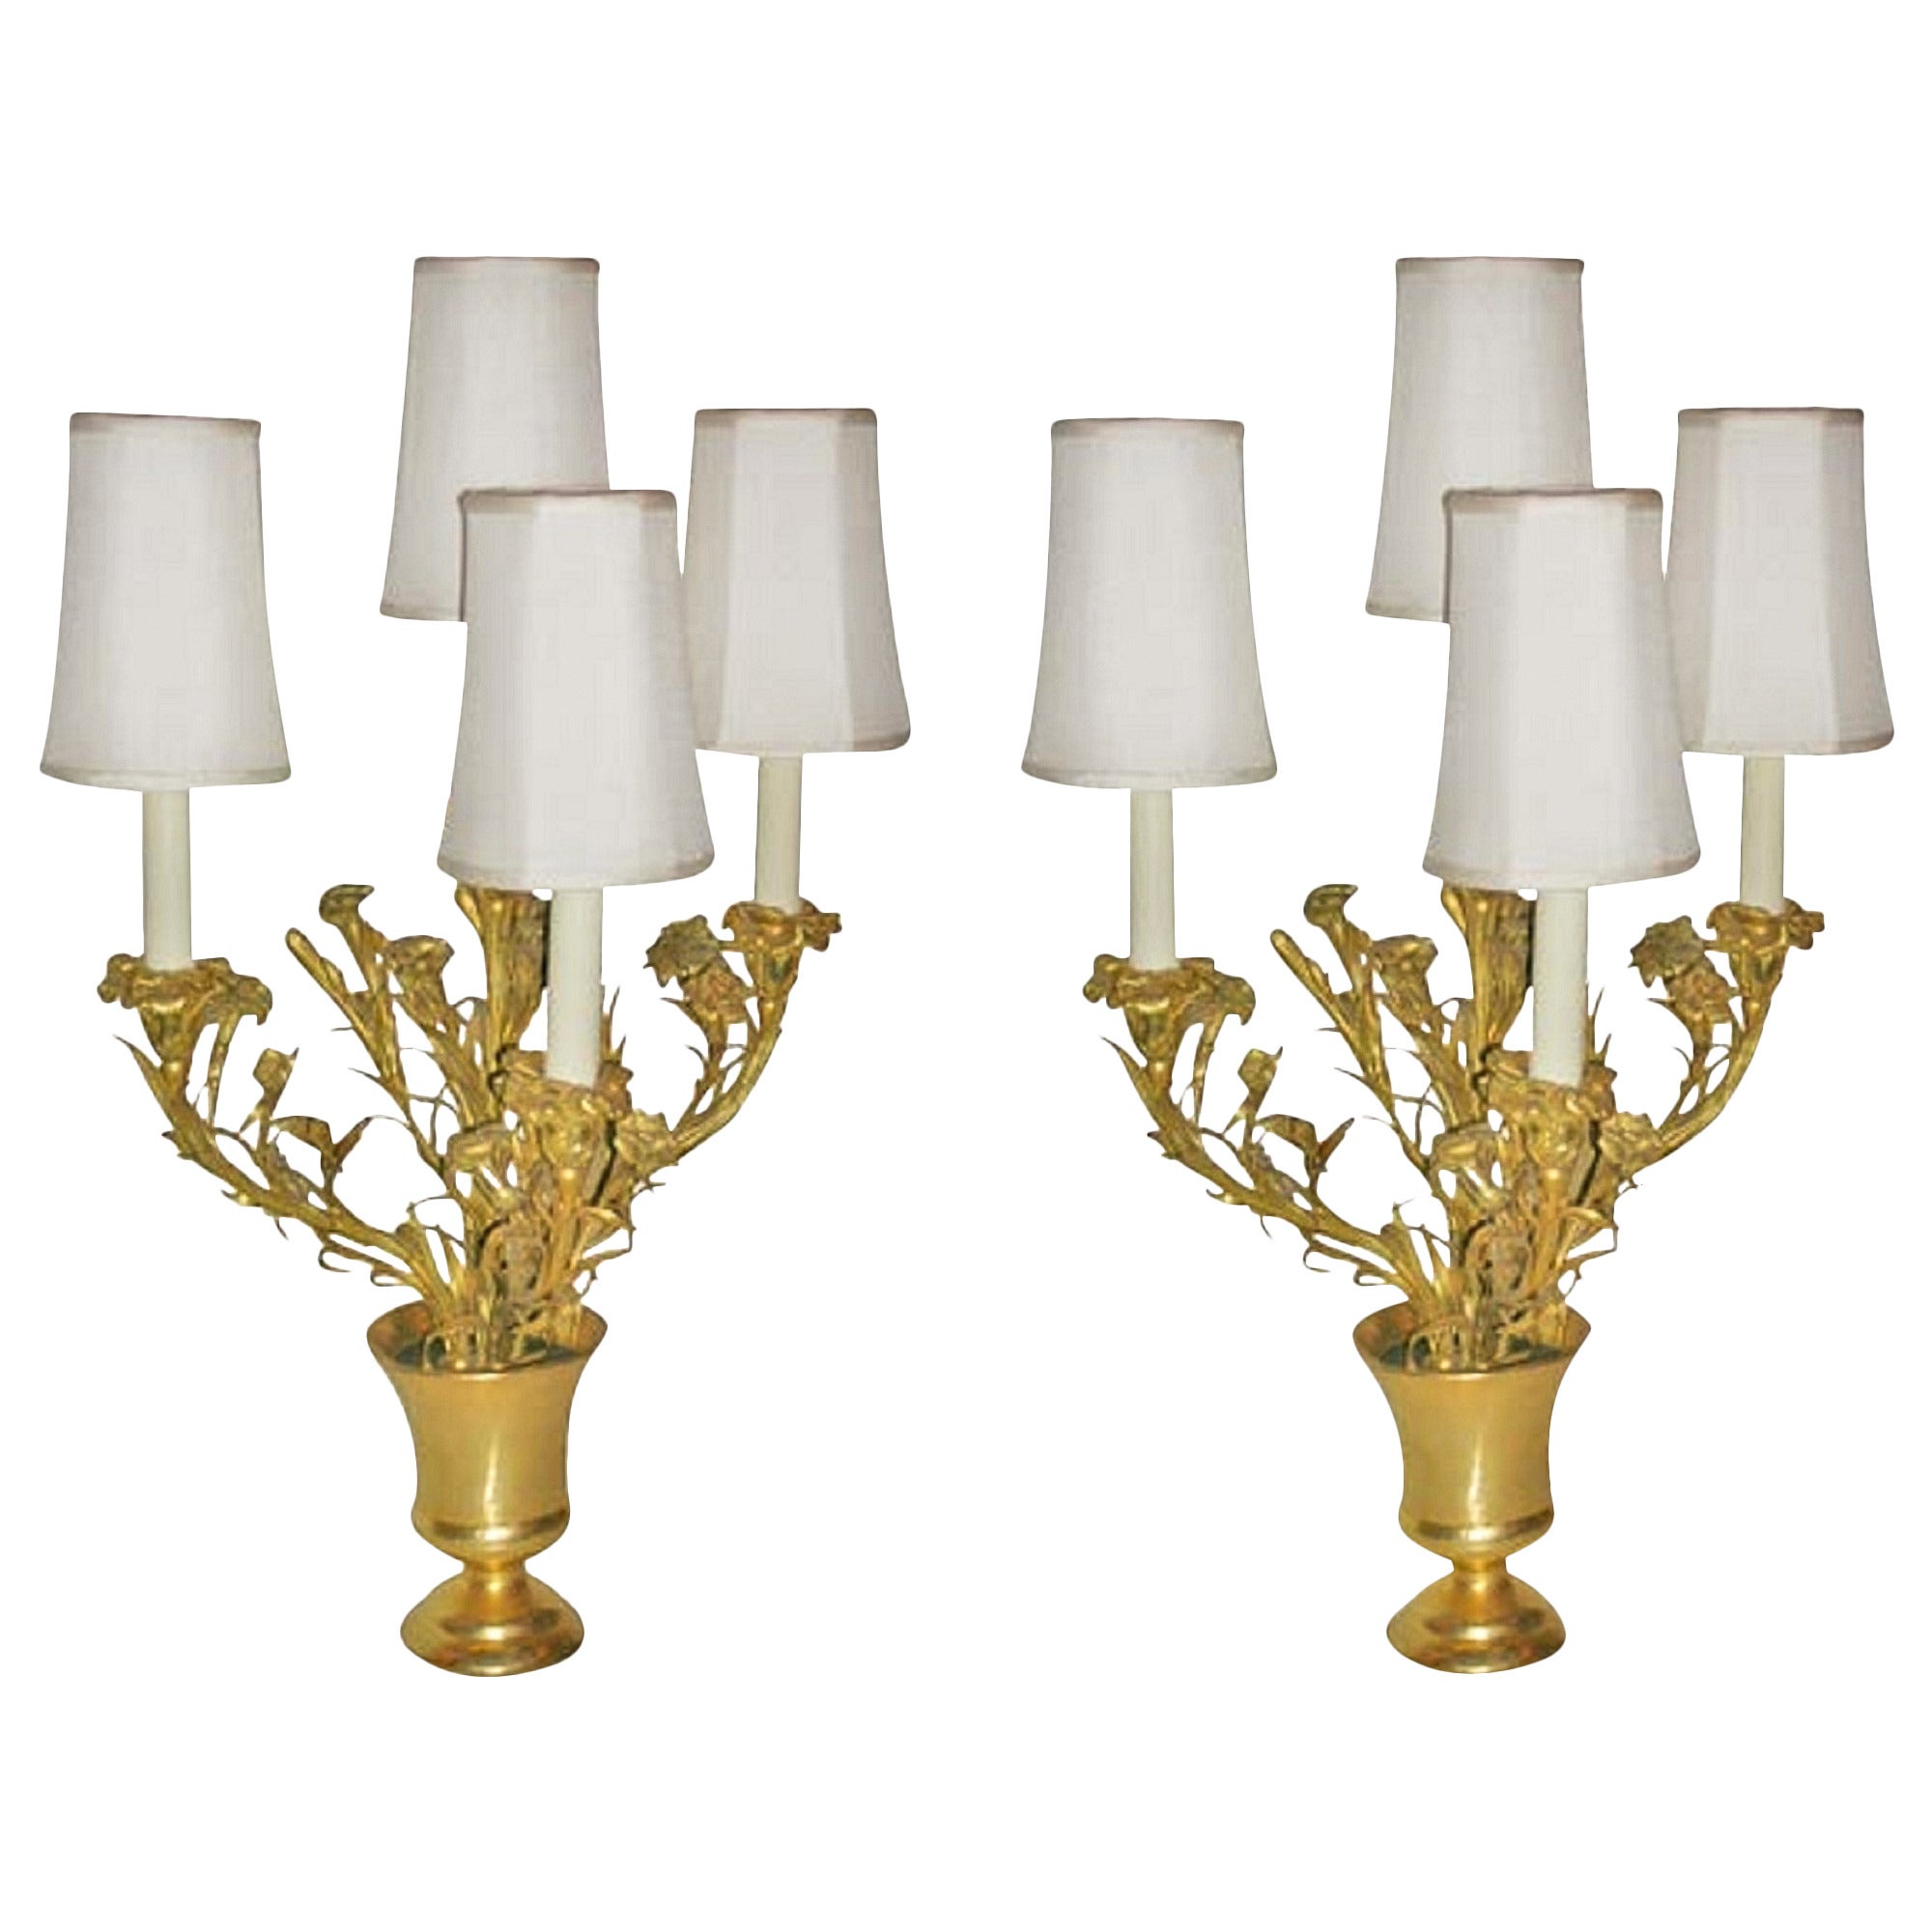 Pair of Four-Arm Gilt Bronze Flower and Pot Form Lamps, French, 1940s For Sale